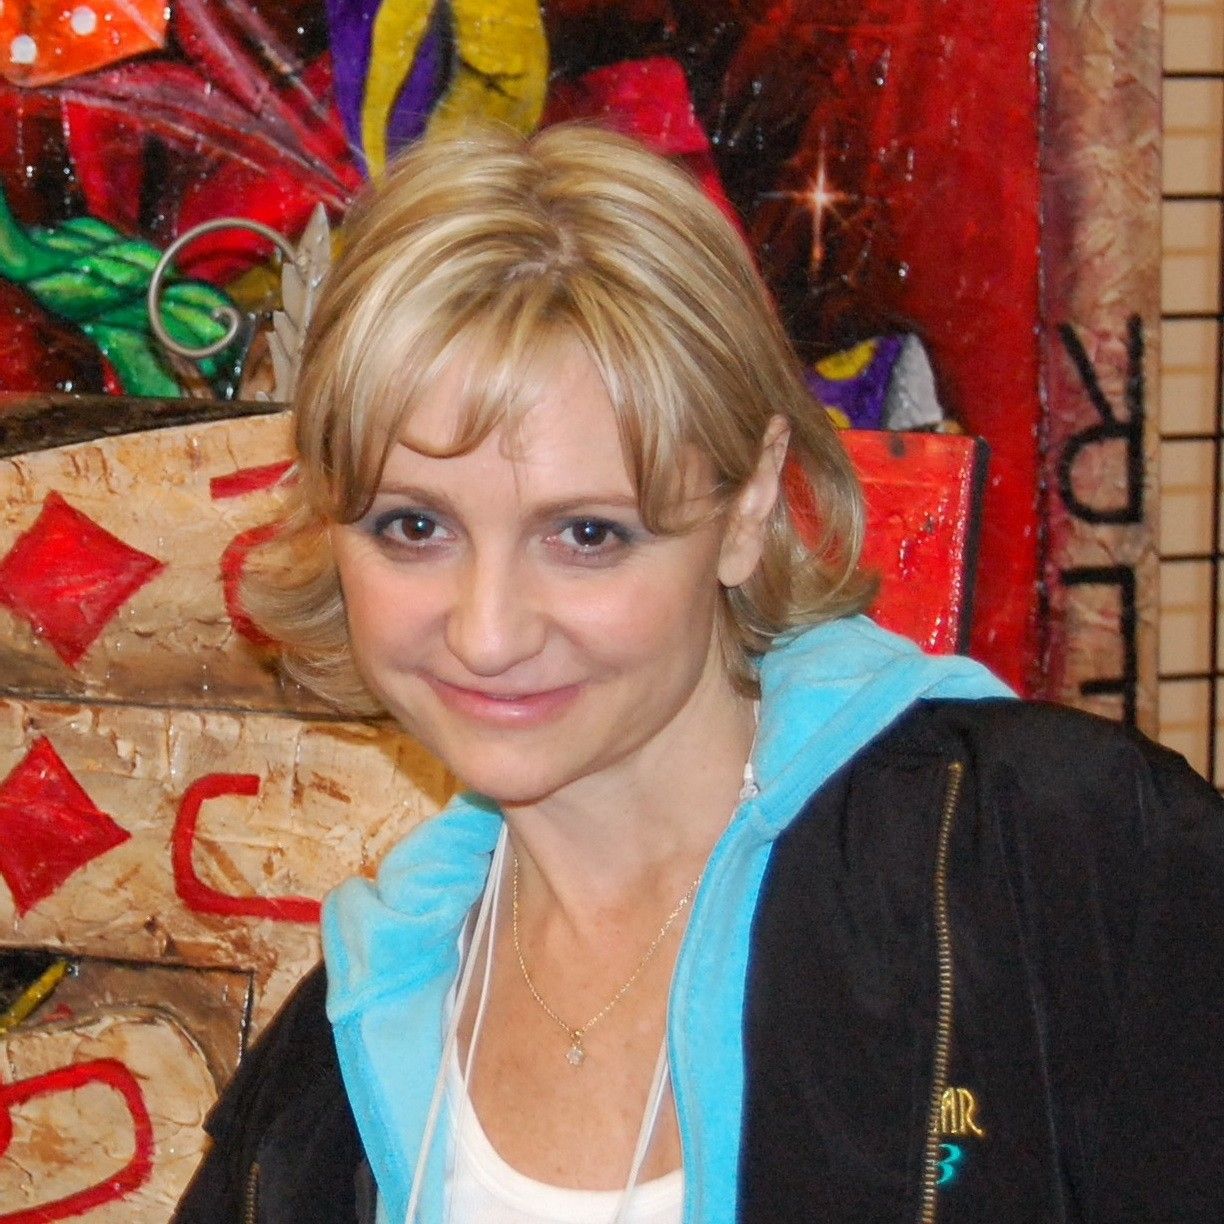 Colorful mural with abstract designs and patterns, with Jennifer Harman standing in front of it wearing a black jacket over a light blue hoodie and white top